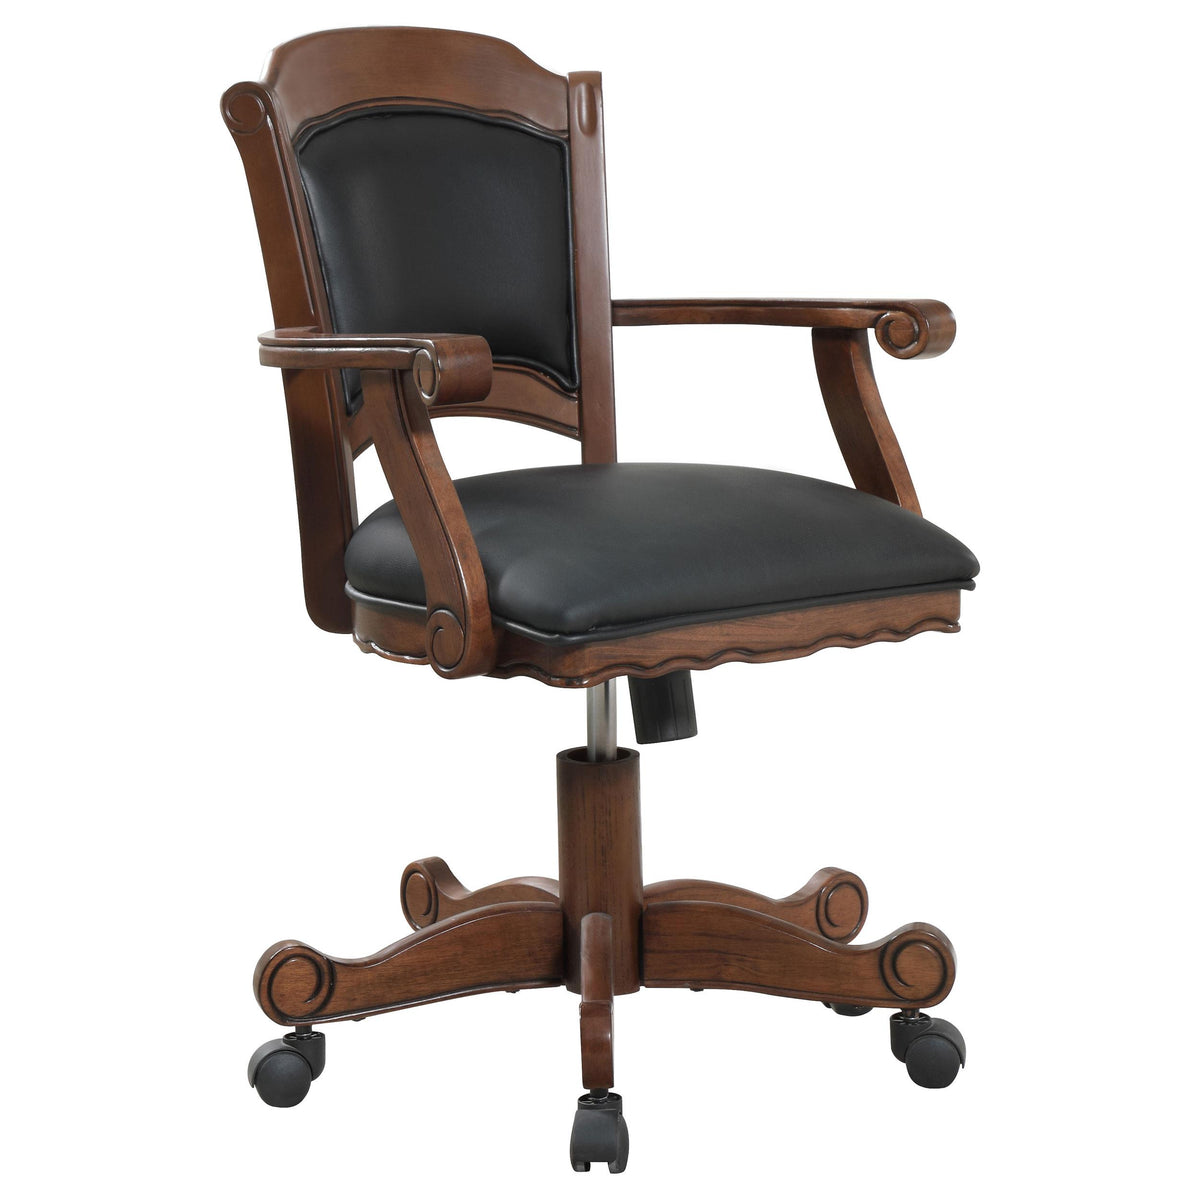 Turk Game Chair with Casters Black and Tobacco  Las Vegas Furniture Stores